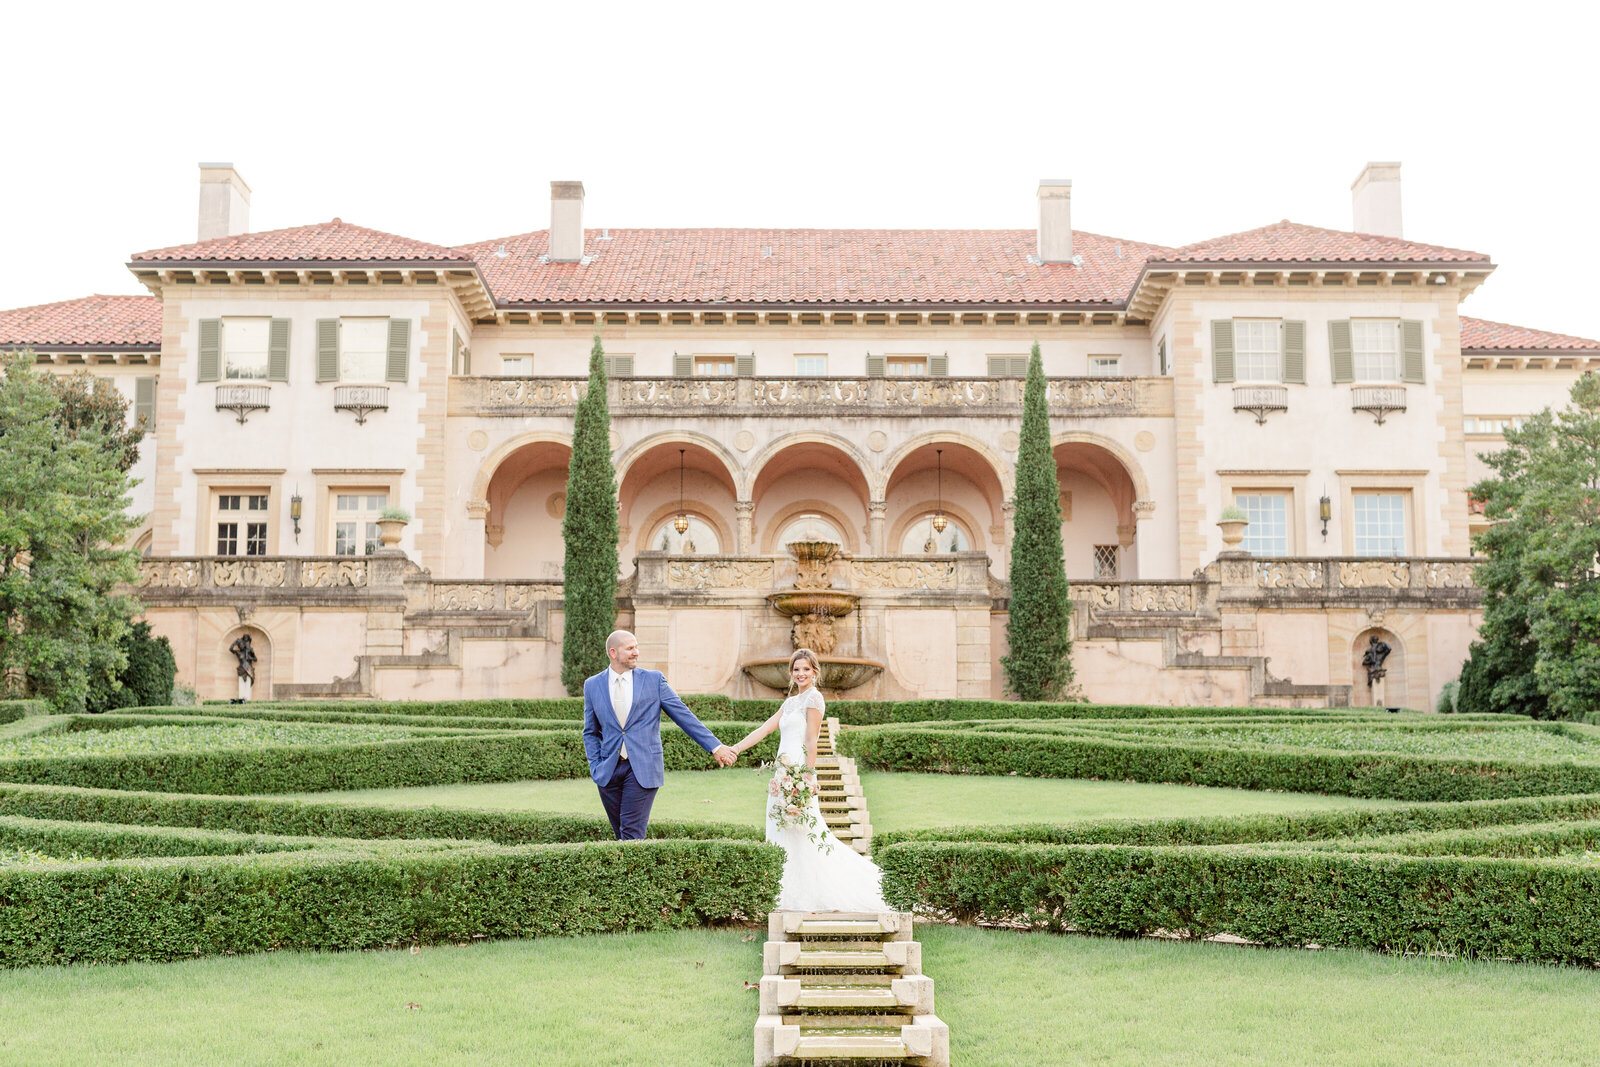 Bride and groom walking through The Philbrook Museum's lush, Tuscan style  garden in Tulsa, Oklahoma on their wedding day.